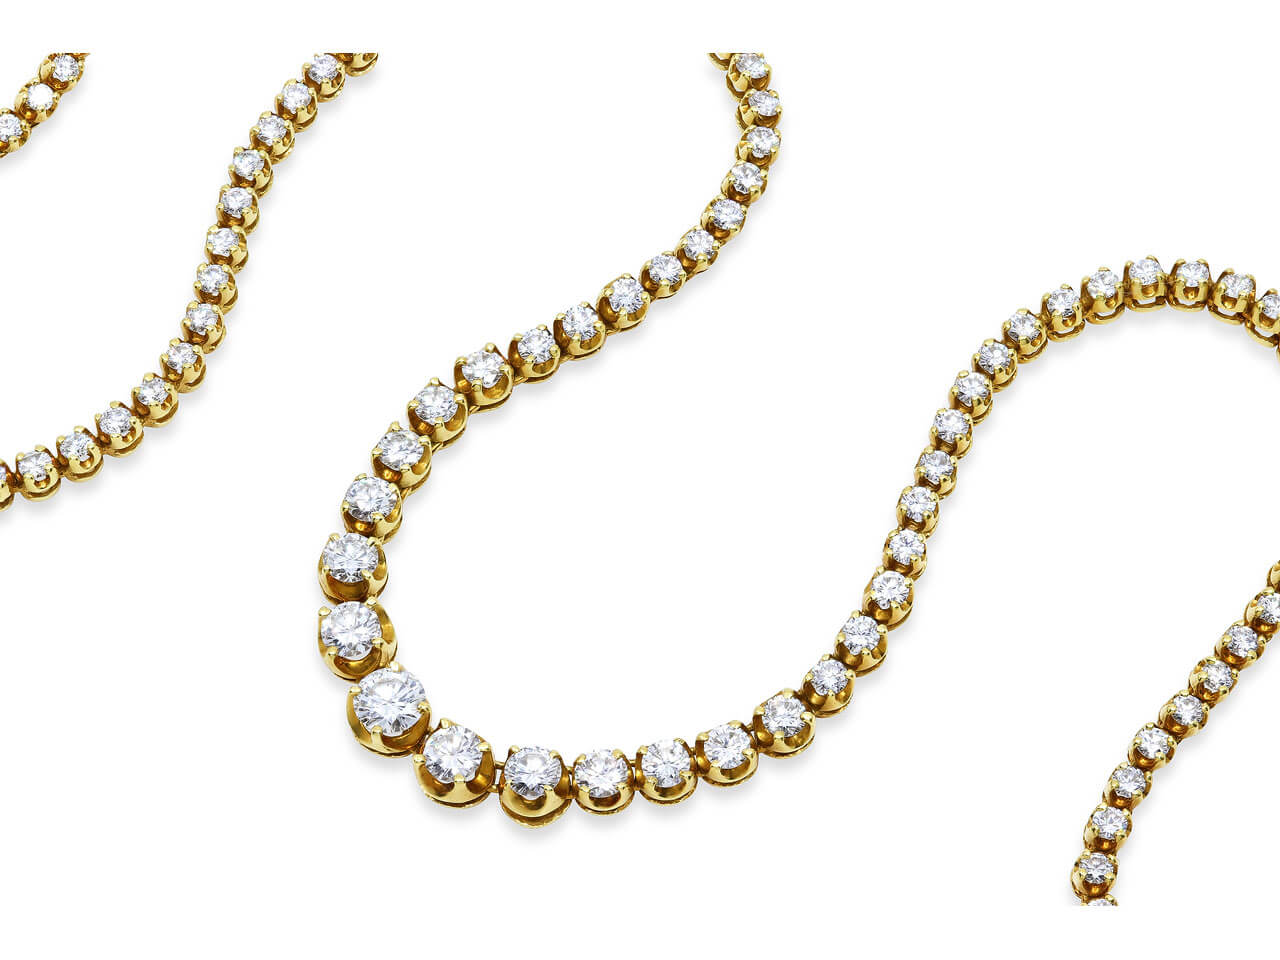 Sold at Auction: A 14 CARAT YELLOW GOLD AND DIAMOND RIVIÈRE NECKLACE